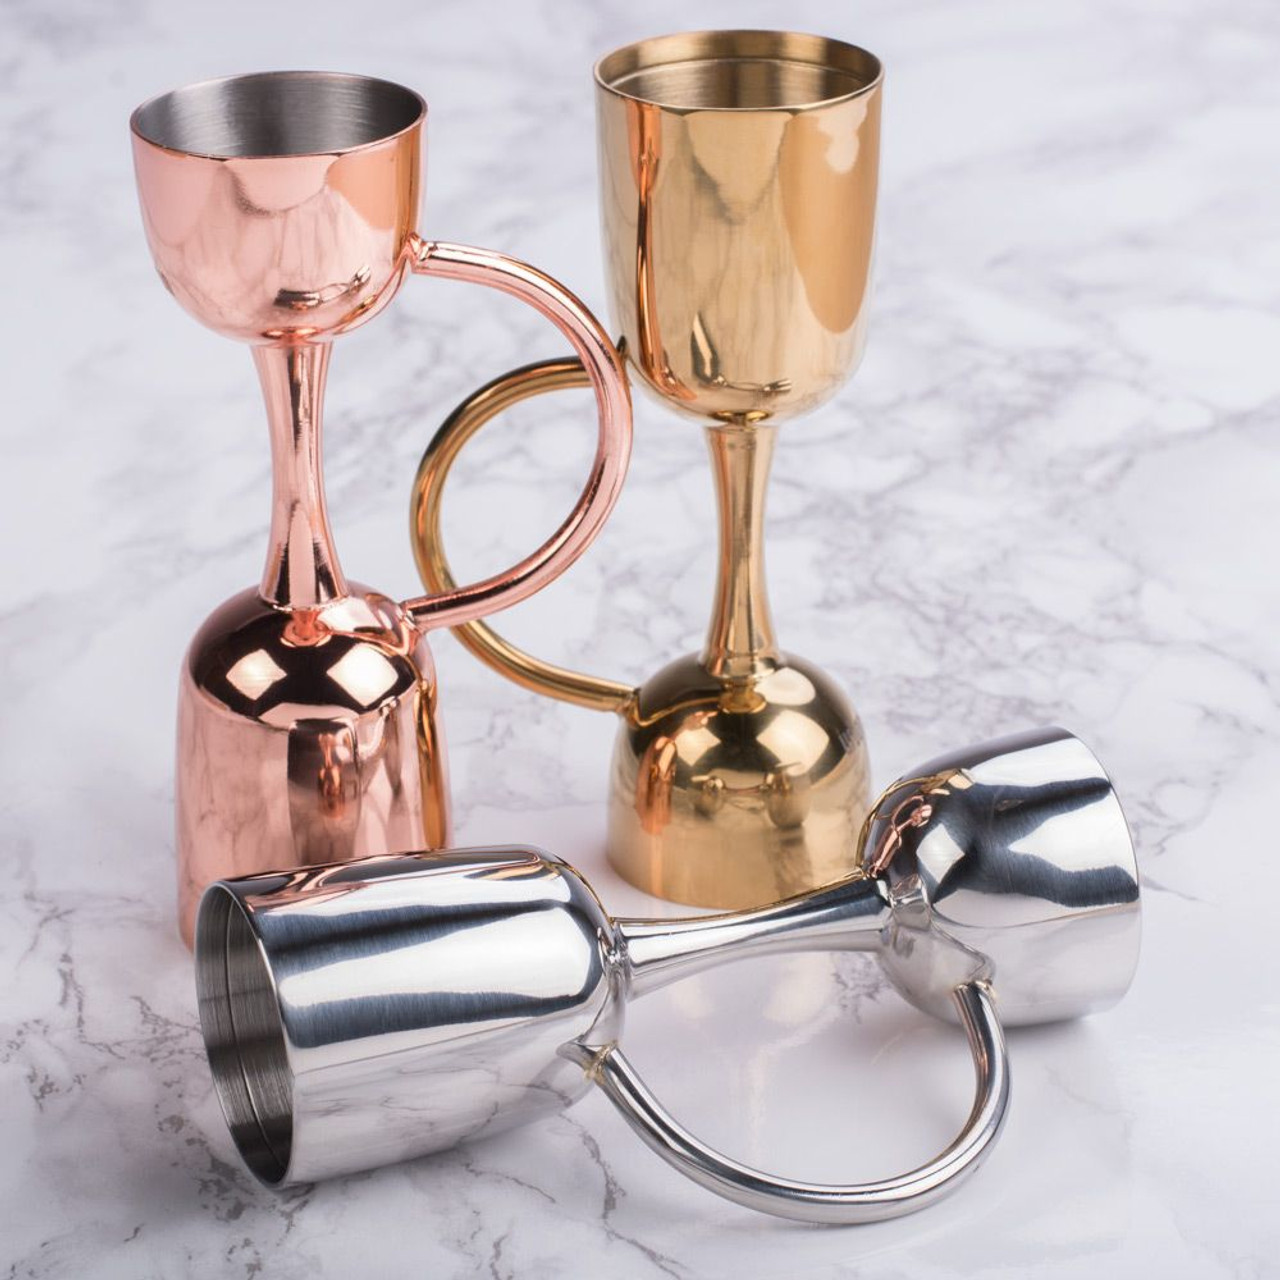 Double End Cocktail Jigger Measurements Cup Stainless Steel Ounce Cup  Barware Bartender Tool S/M/L 